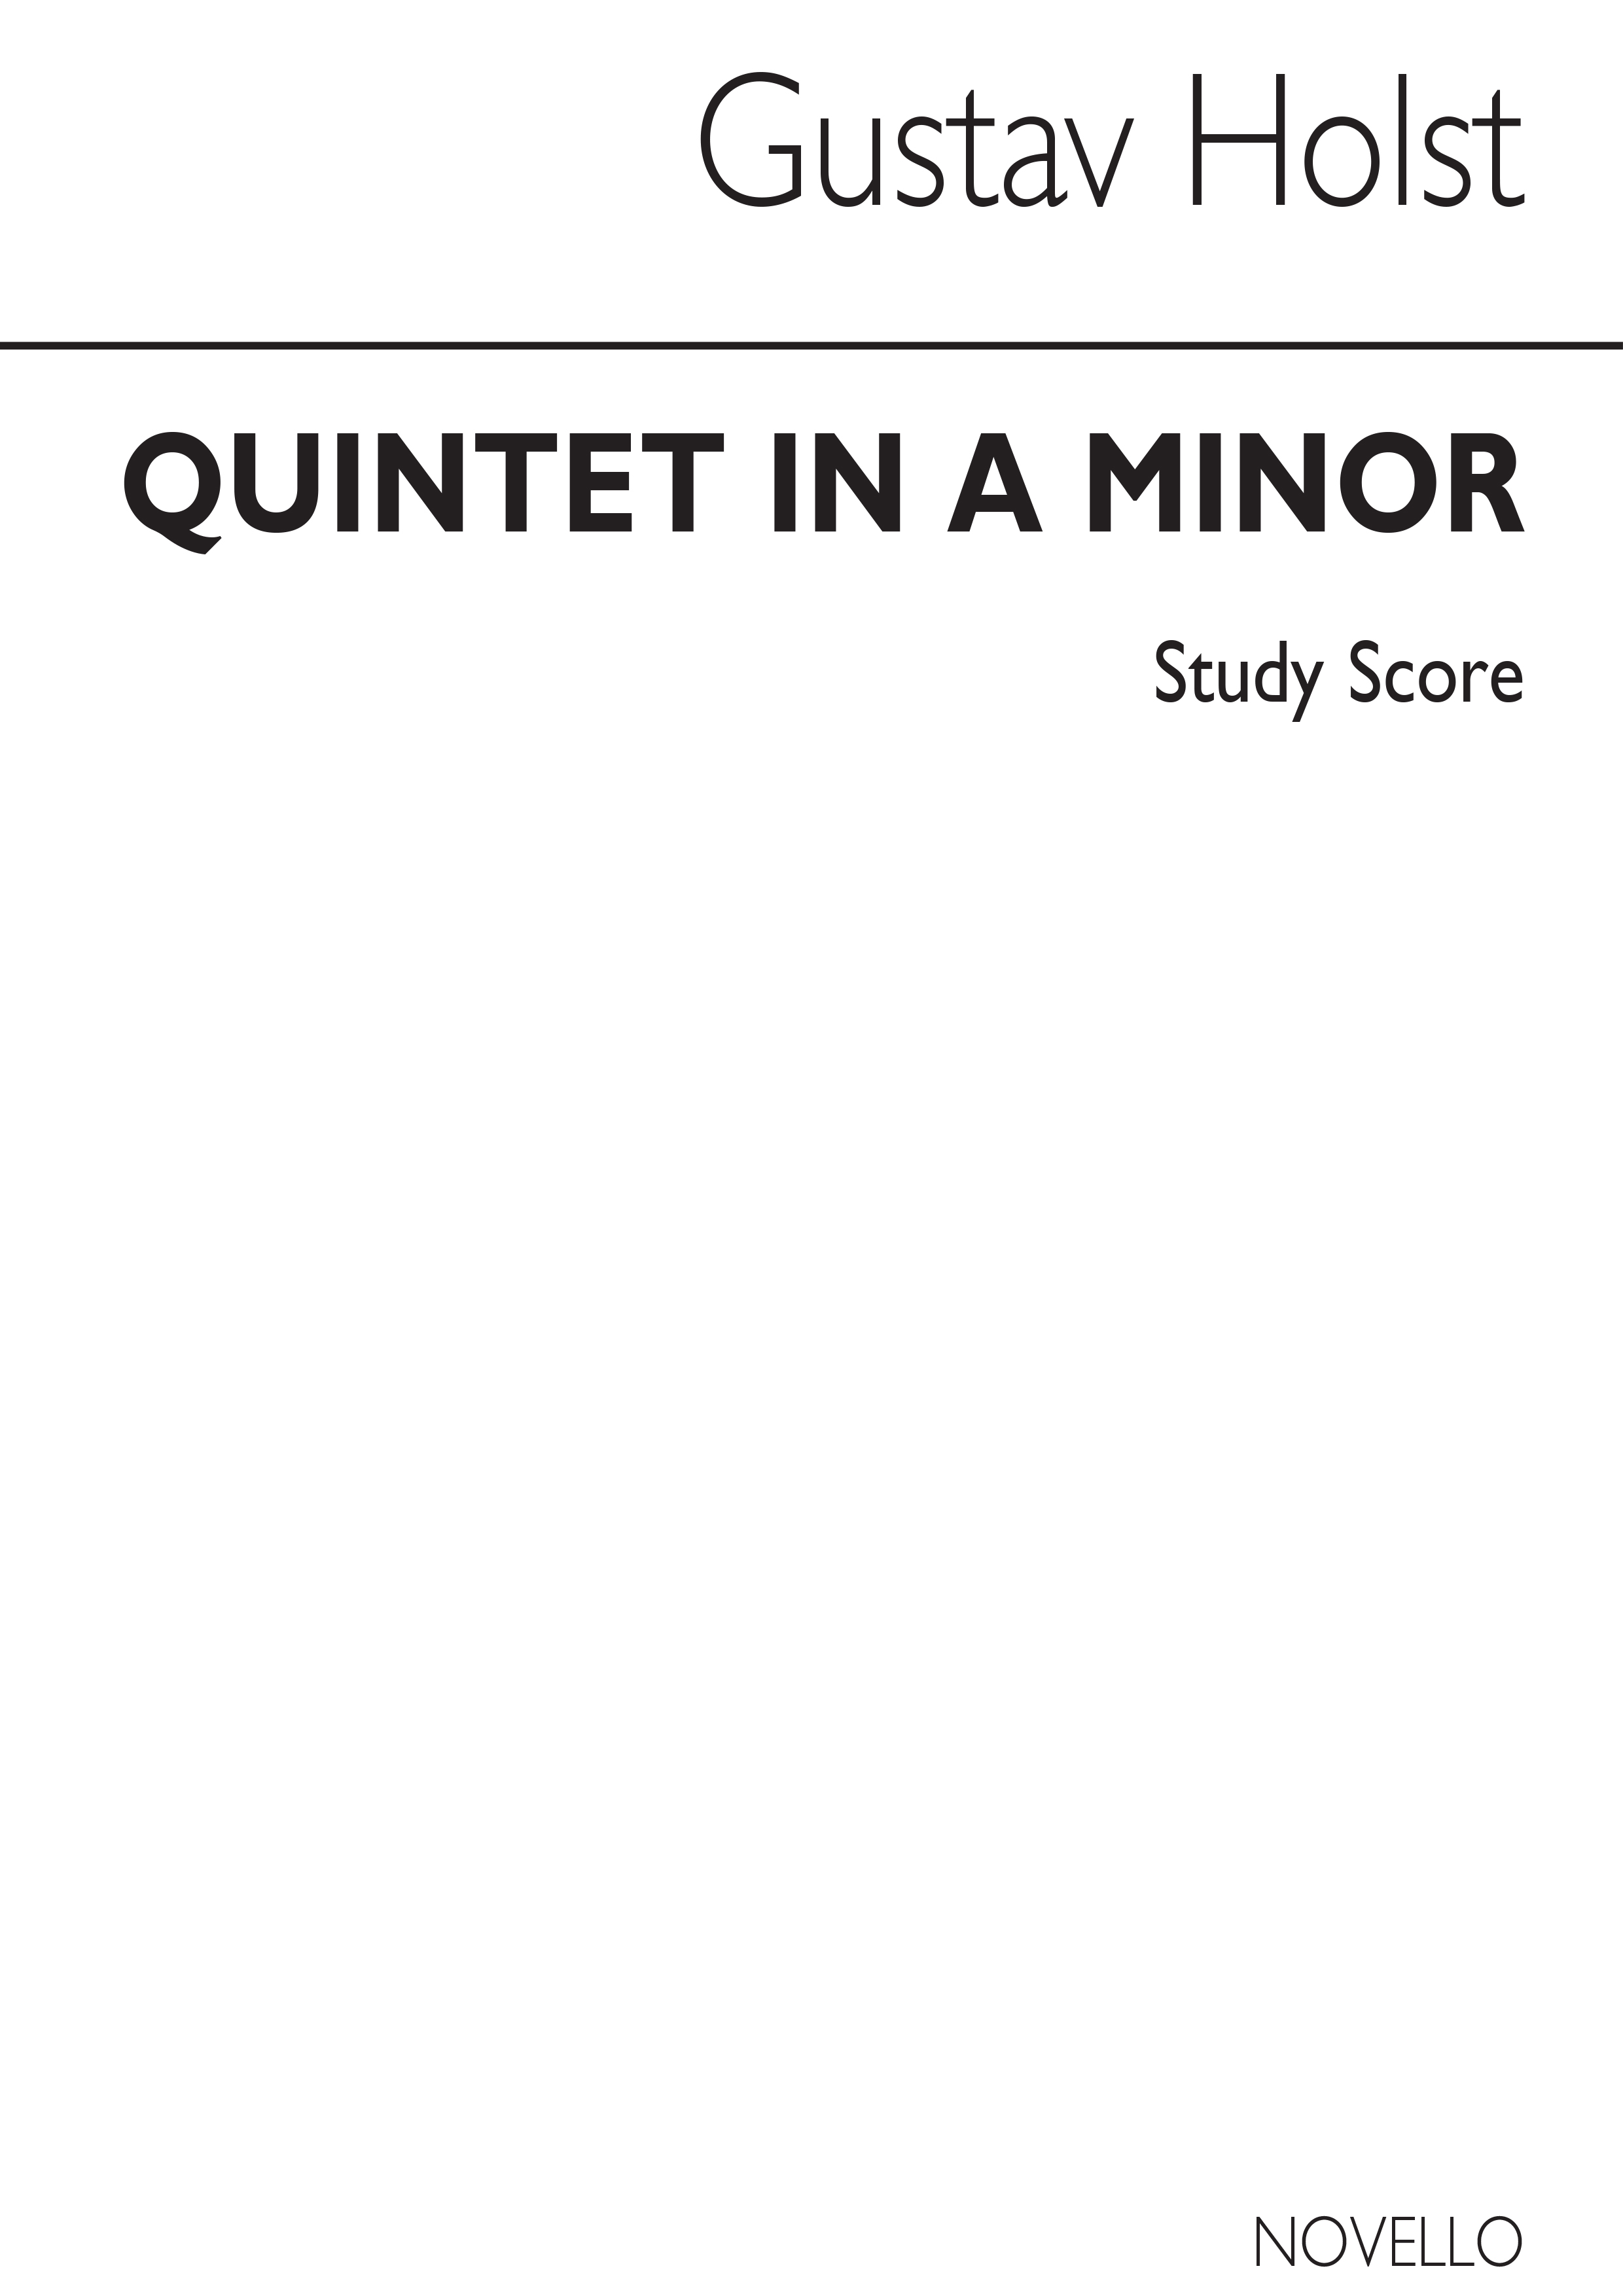 Gustav Holst: Quintet In A Minor For Piano And Wind (Study Score)